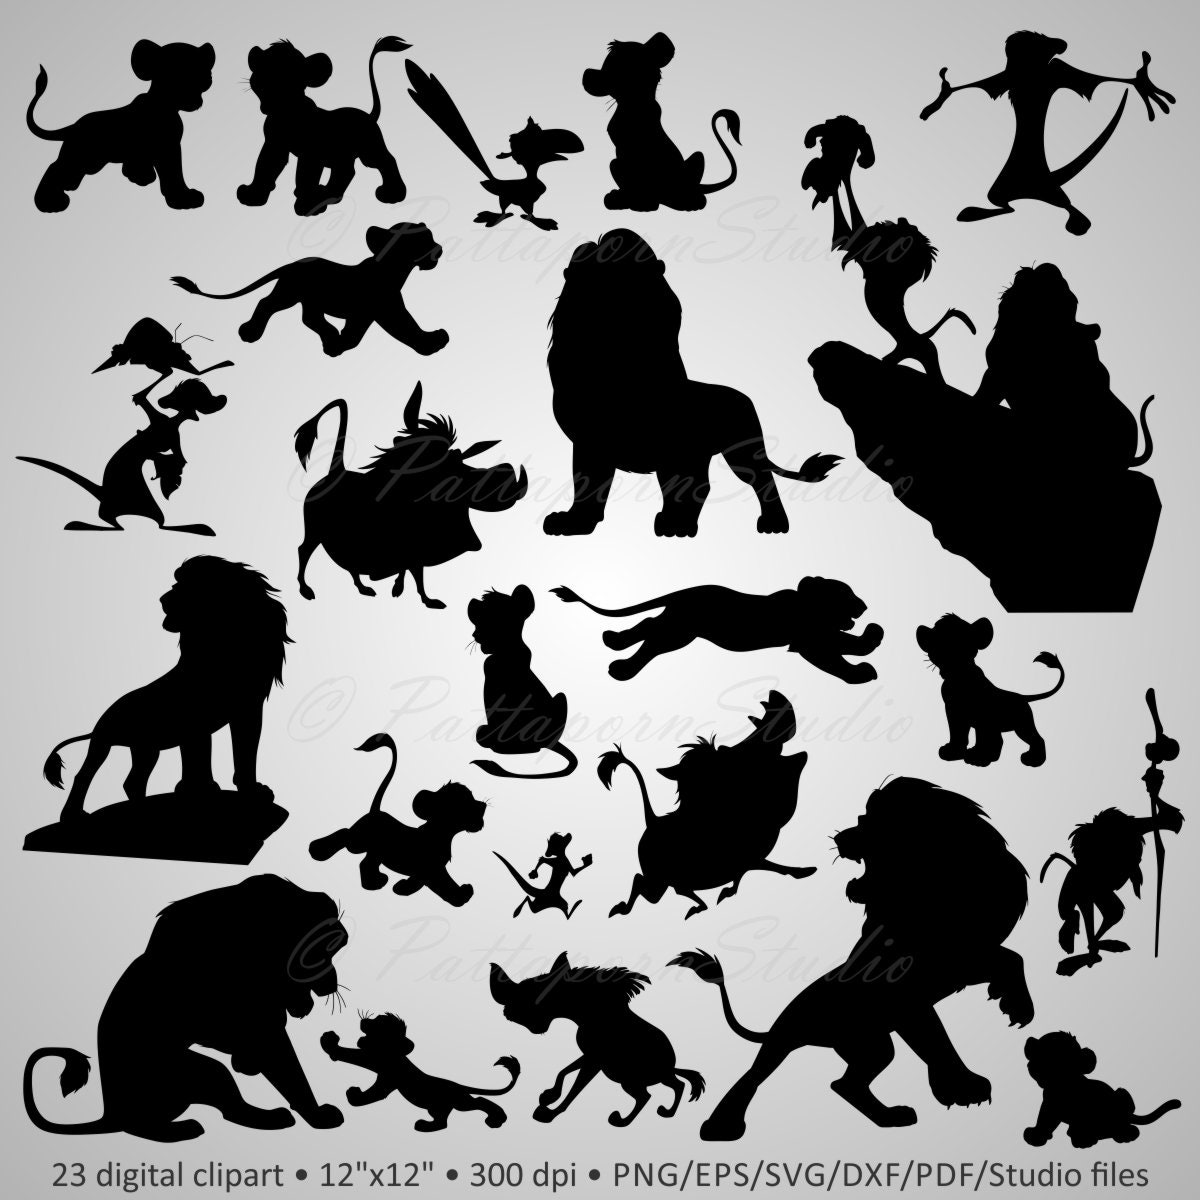 Download Buy 2 Get 1 Free! Digital Clipart Silhouettes "Lion King ...